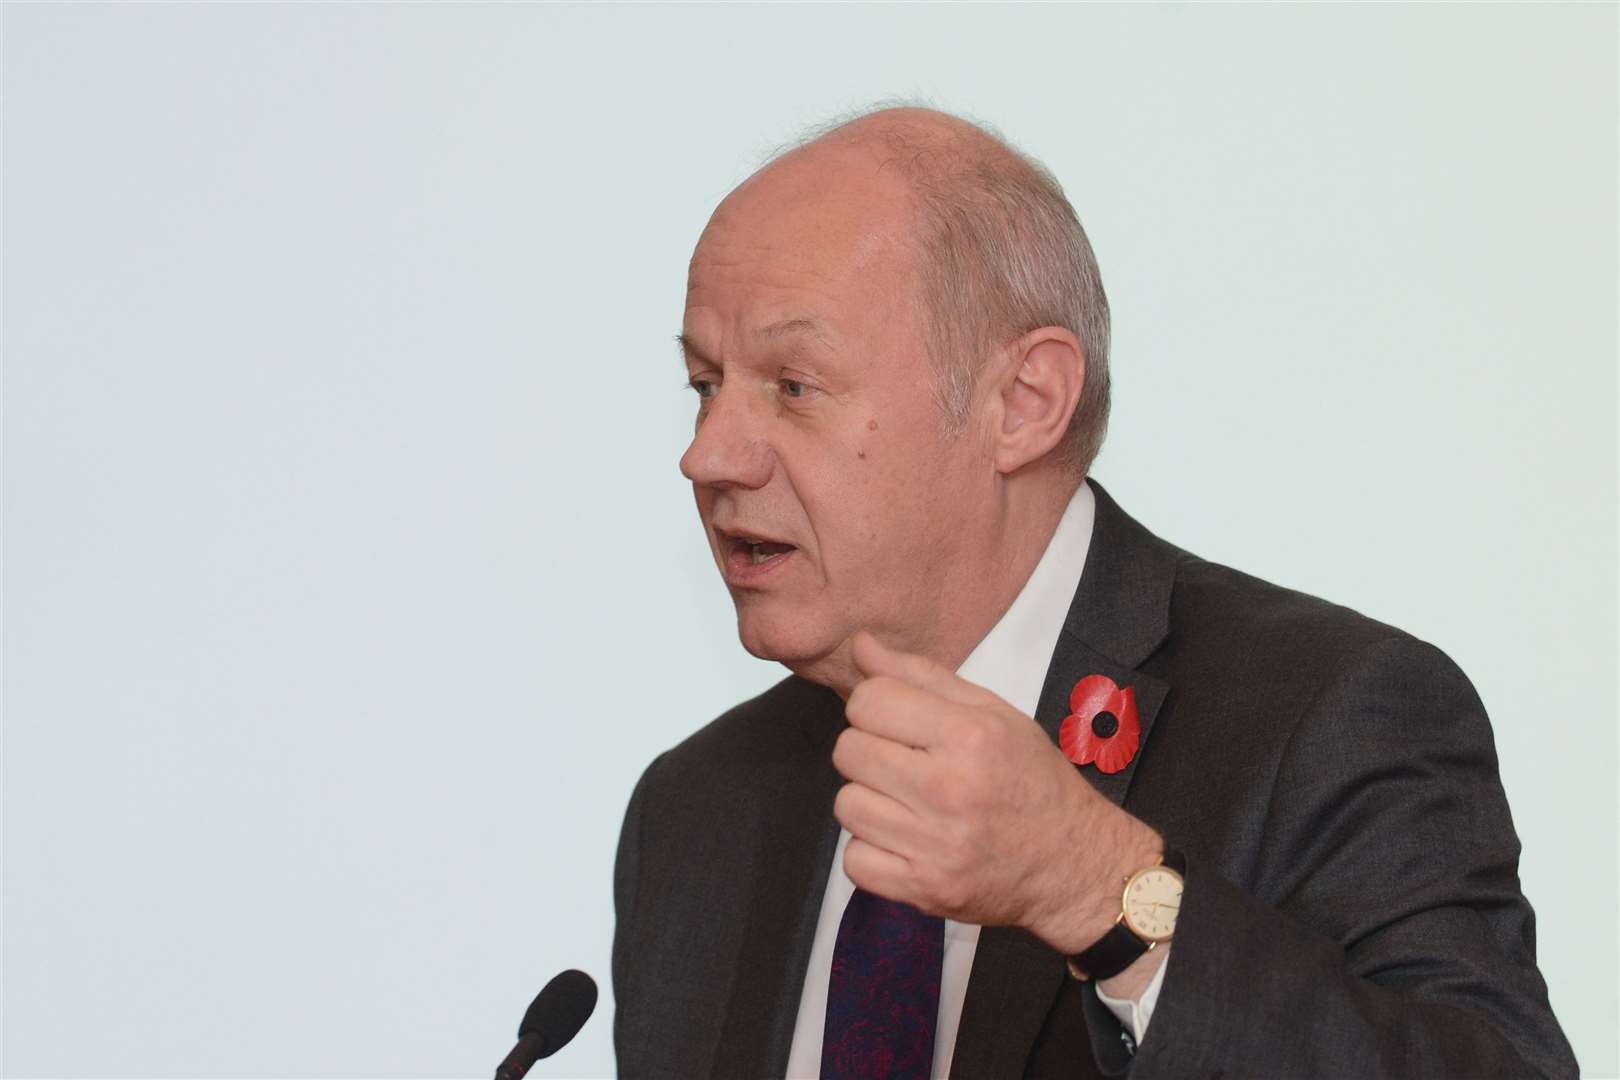 MP Damian Green believes it was "about time" someone said something about protester Steve Bray